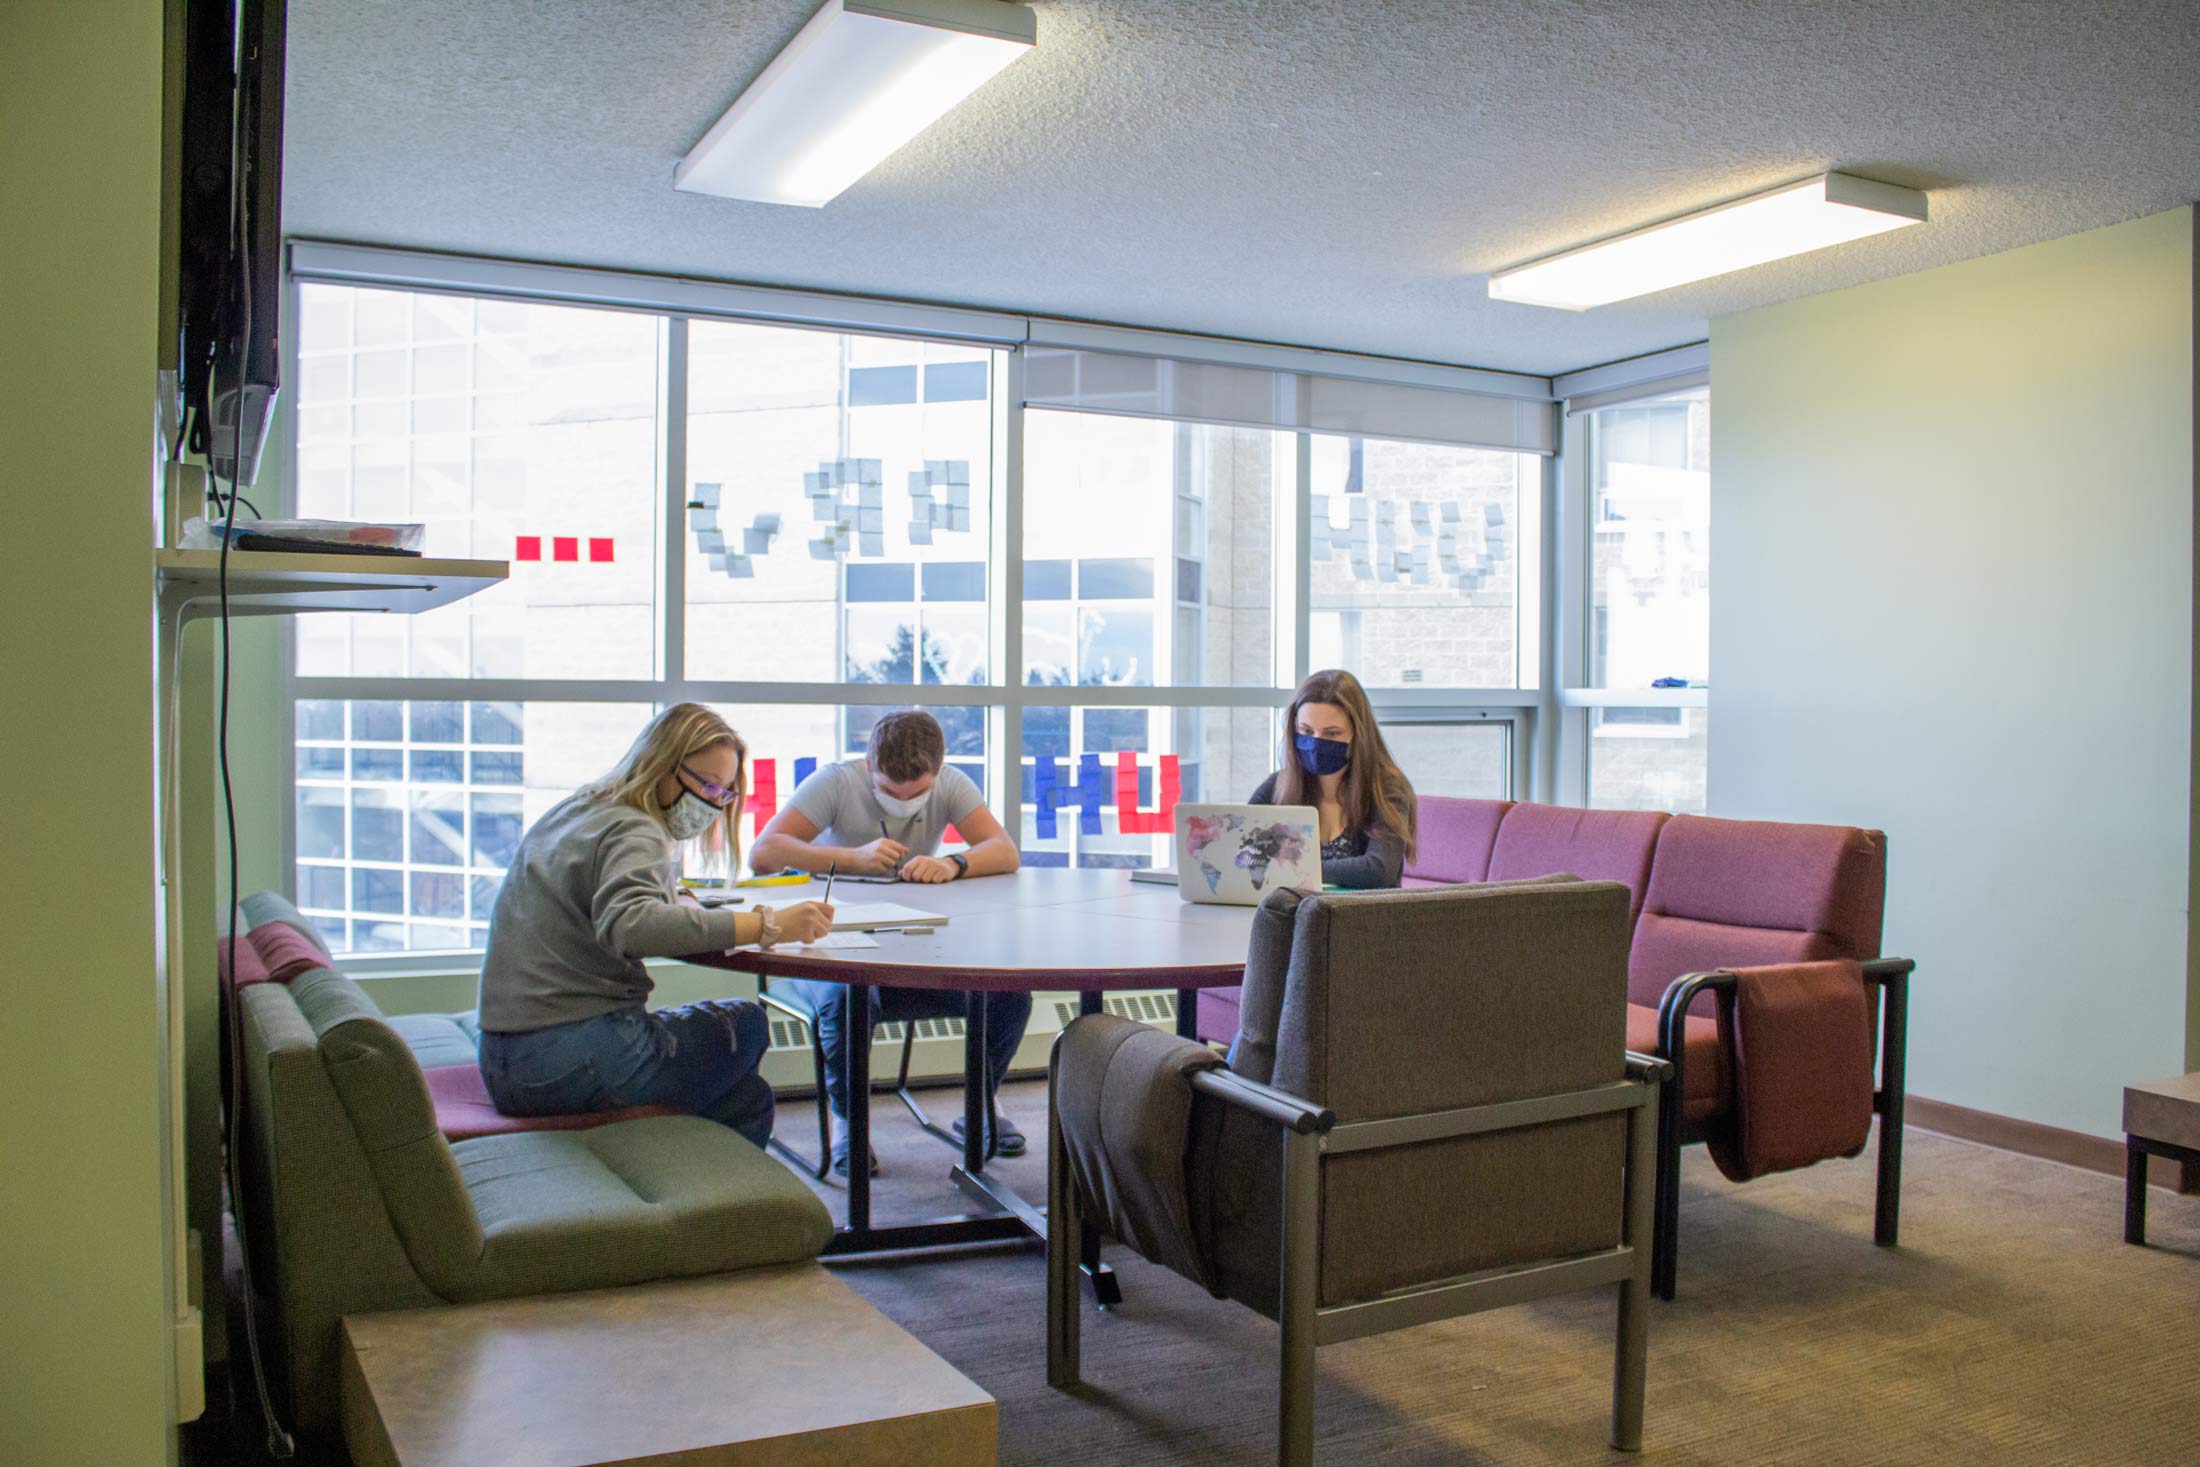 Students studying together around a table in residence